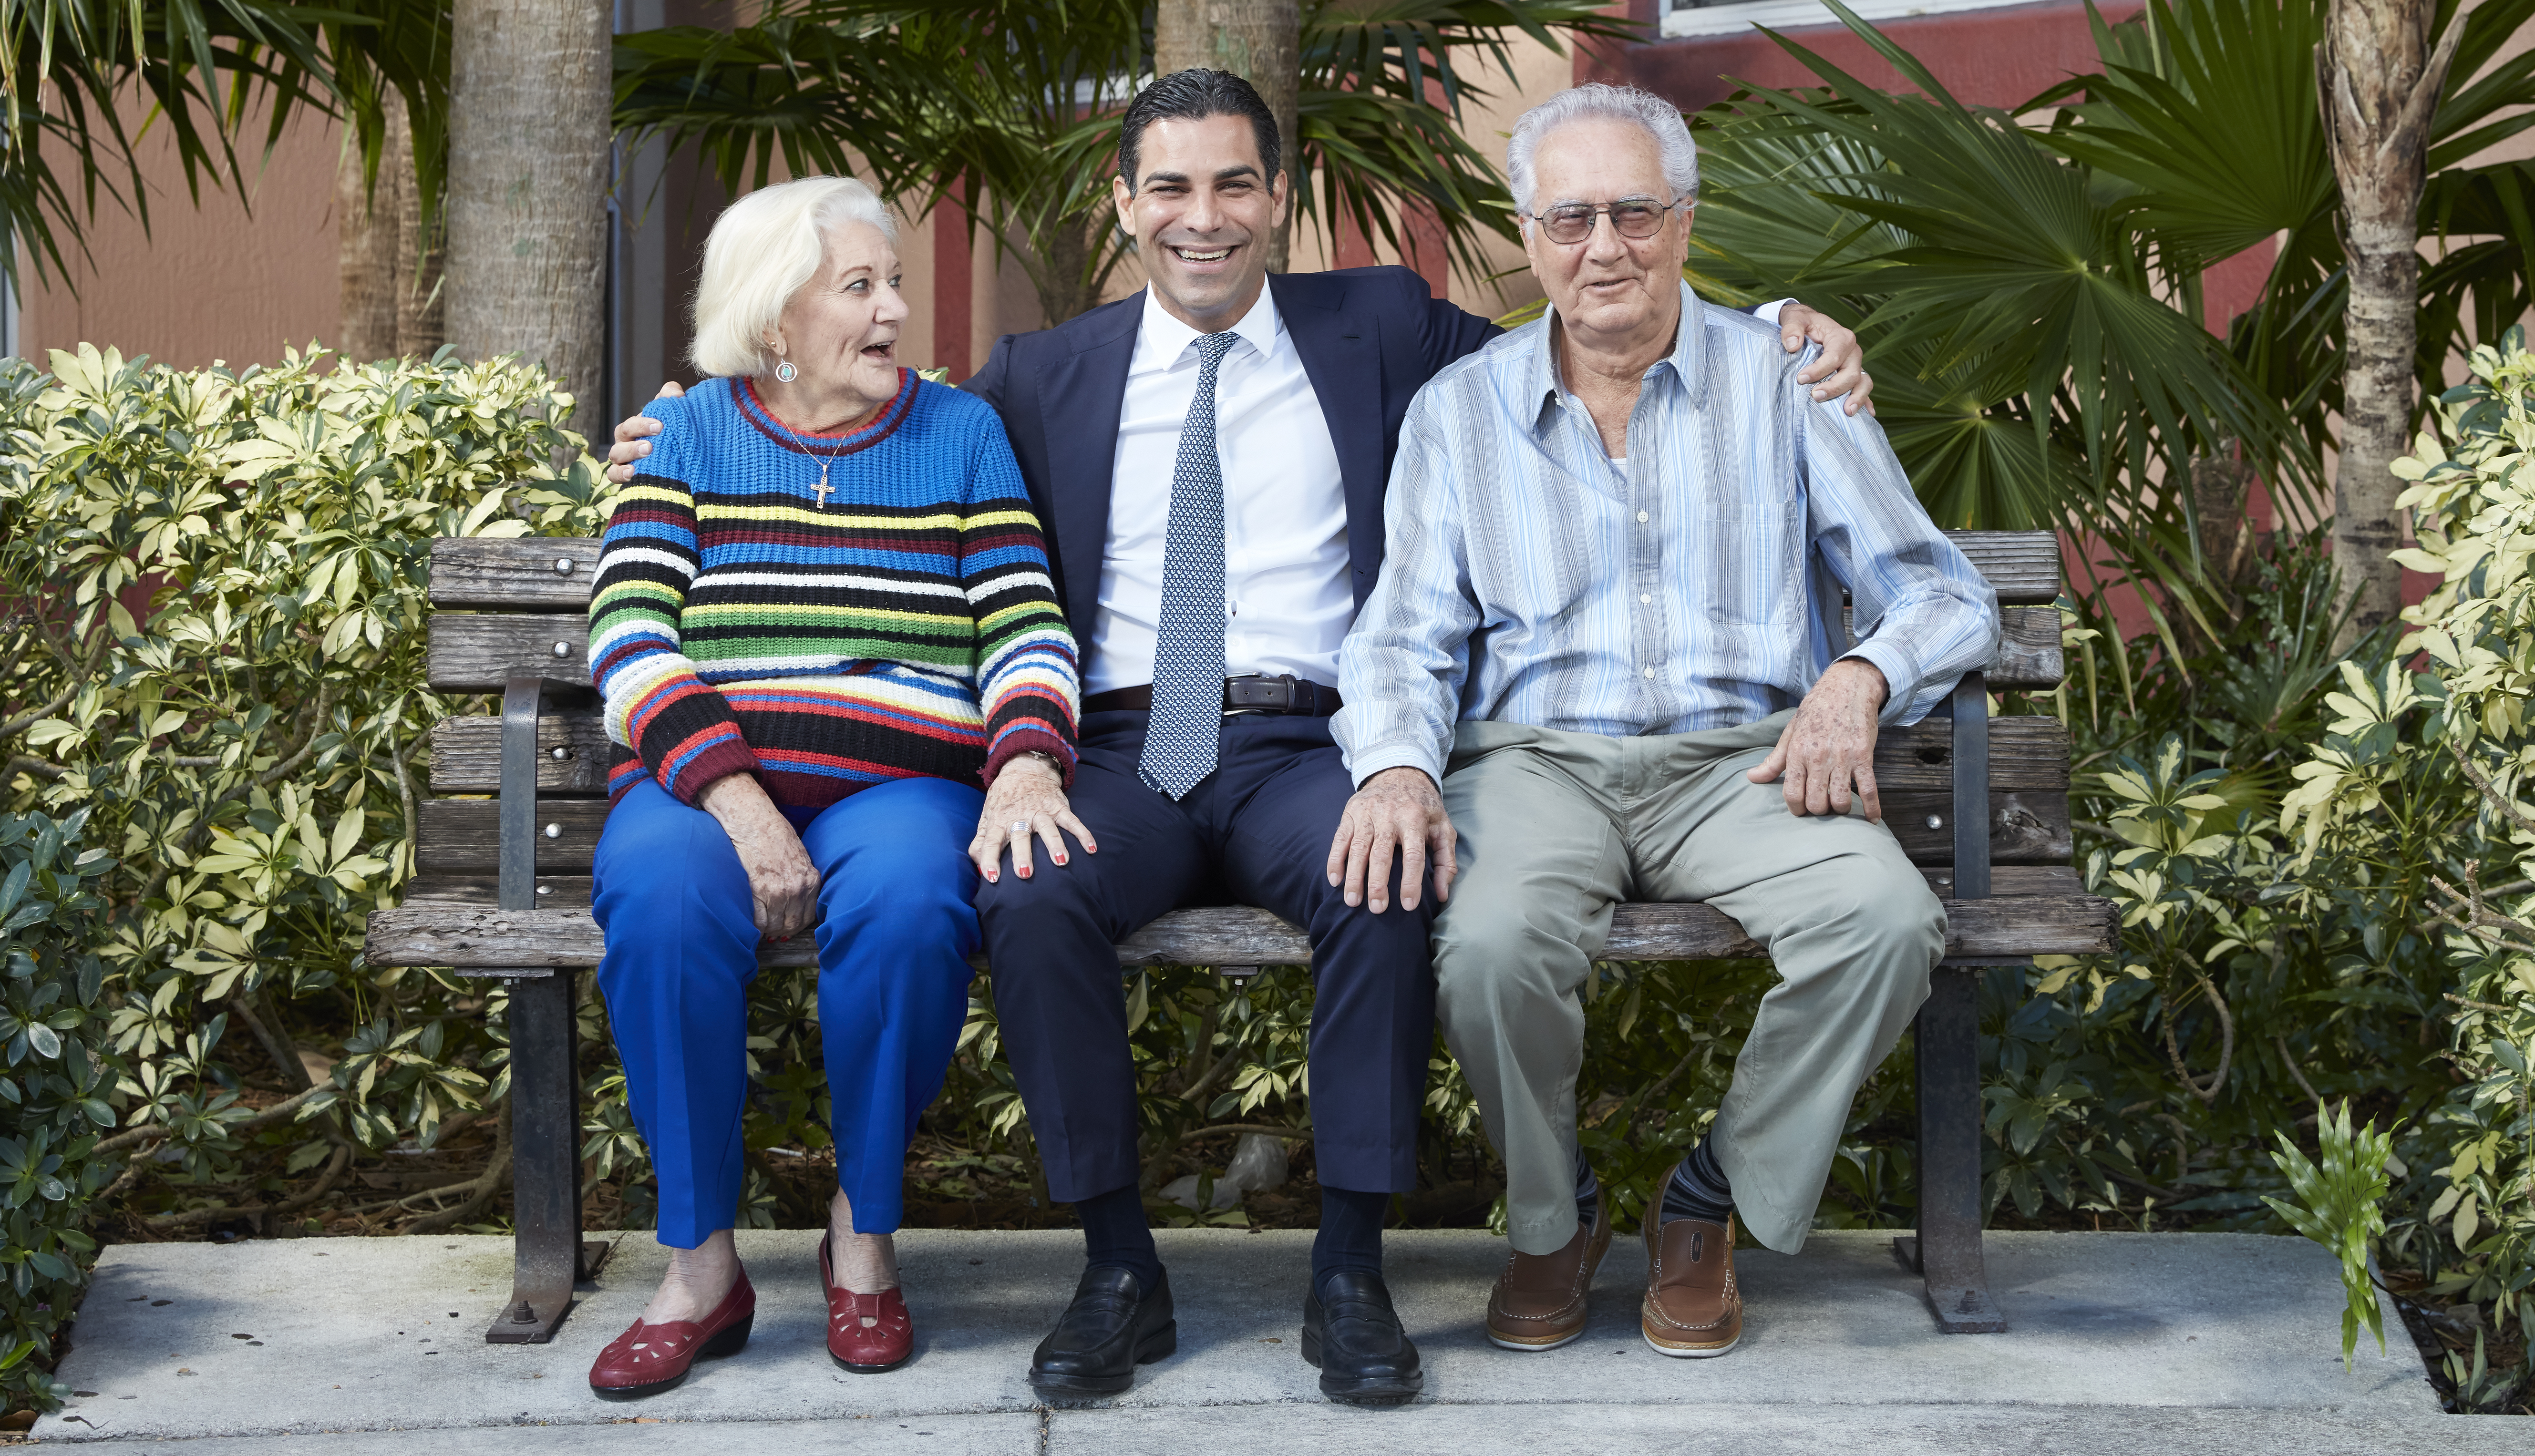 miami florida mayor francis suarez sits on a bench outside an apartment building with two residents